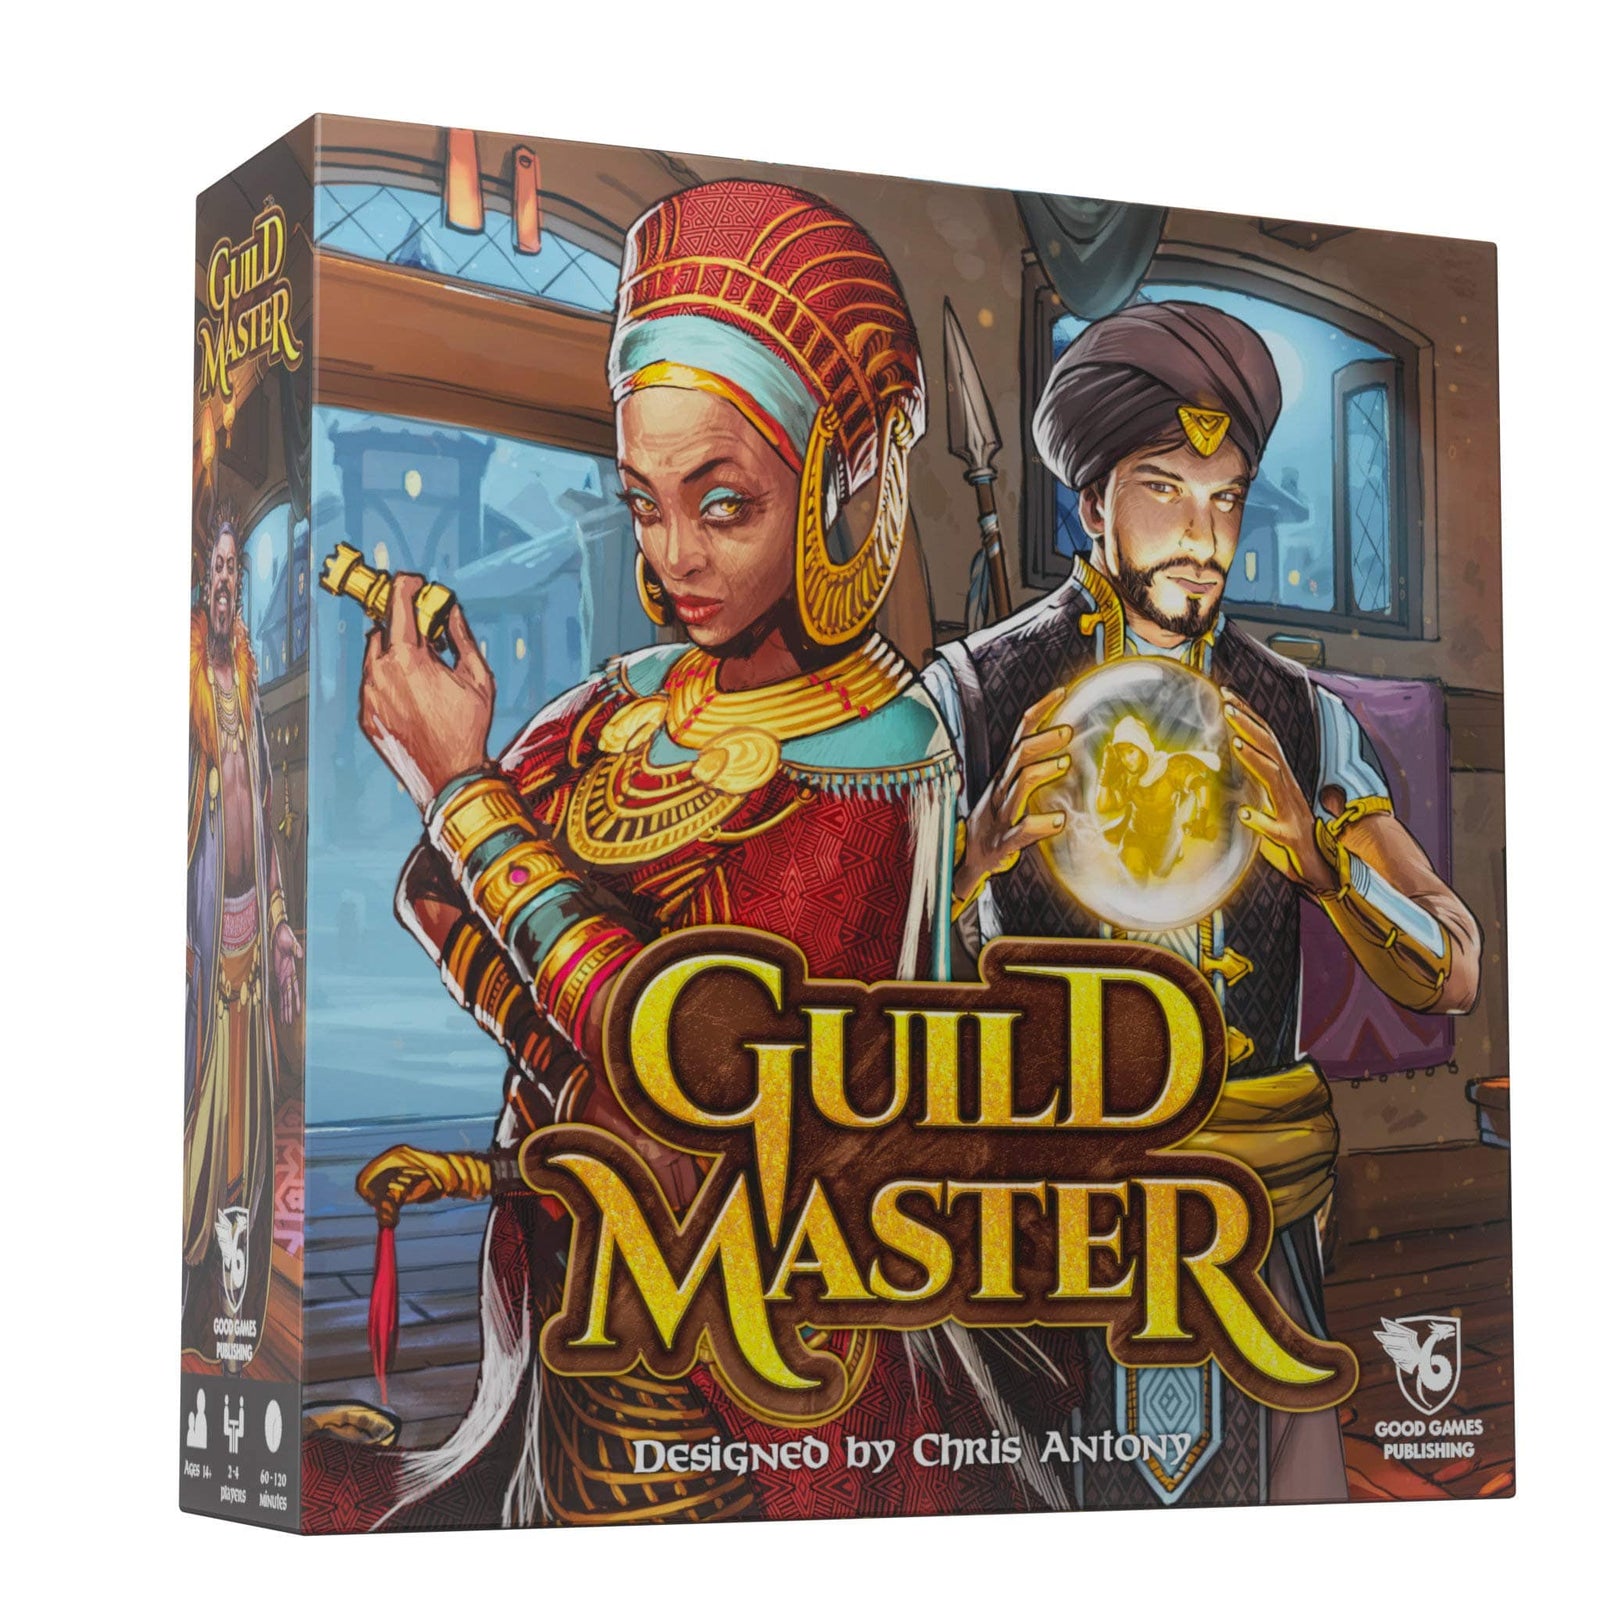 Good Games Publishing Guild Master - Lost City Toys